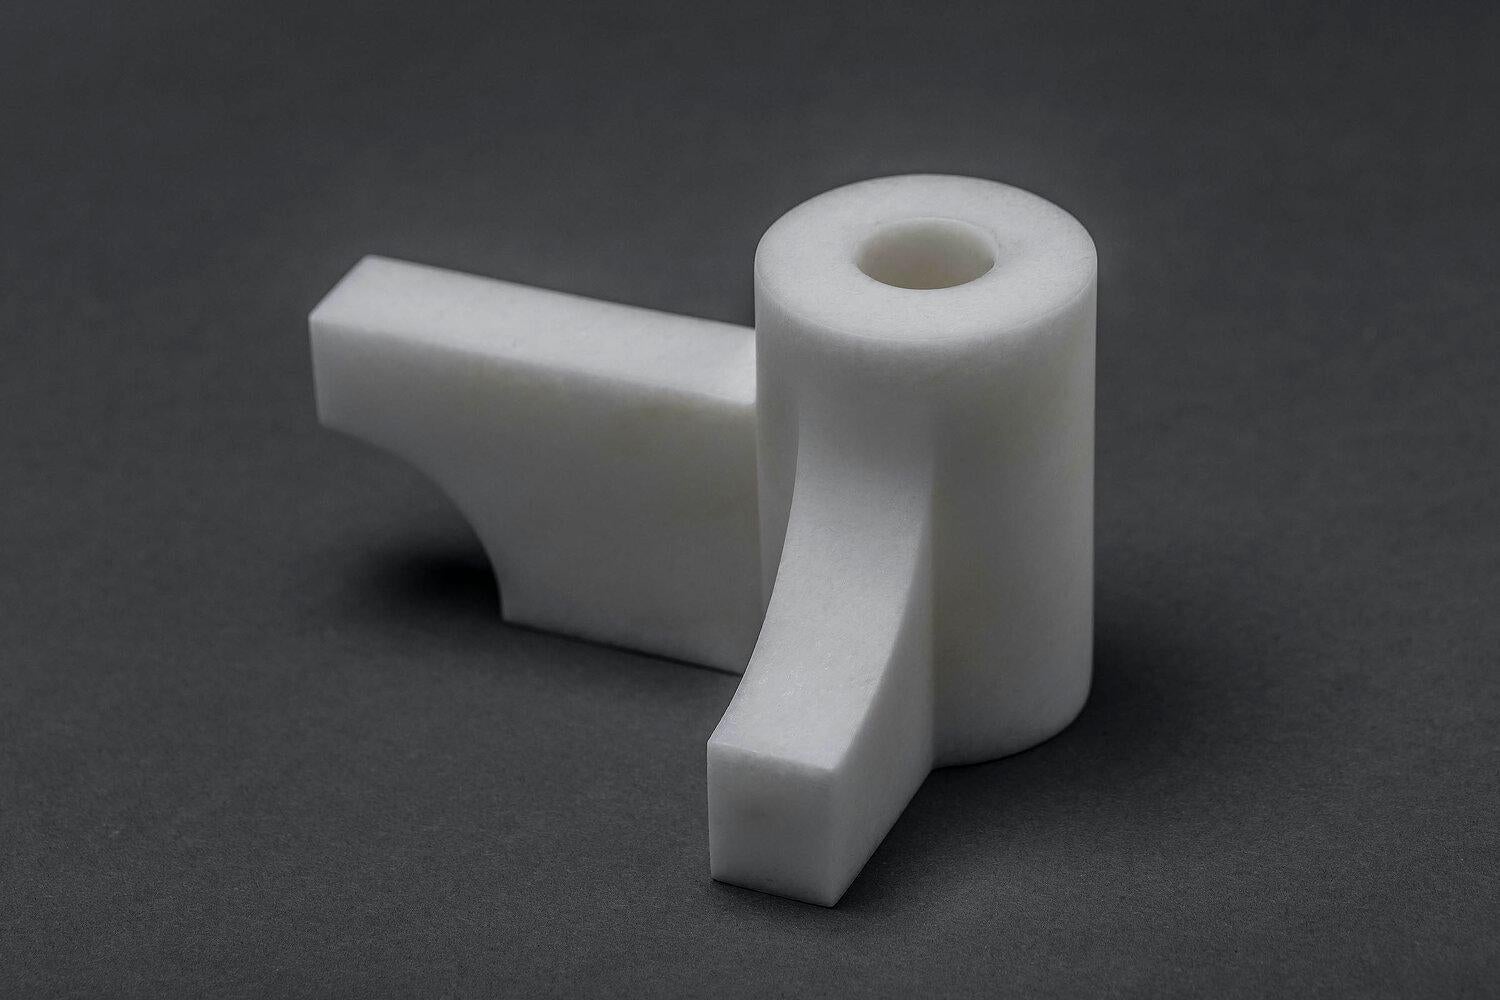 Porta Velas Galeana candleholder by Jorge Diego Etienne
Limited Edition of 10 + 1 AP
Dimensions: D 12.5 x W 8.5 x H 7.5 cm
Material: alabaster

Galeana is a collection of 6 objects designed by Jorge Diego Etienne and sculpted in alabaster by